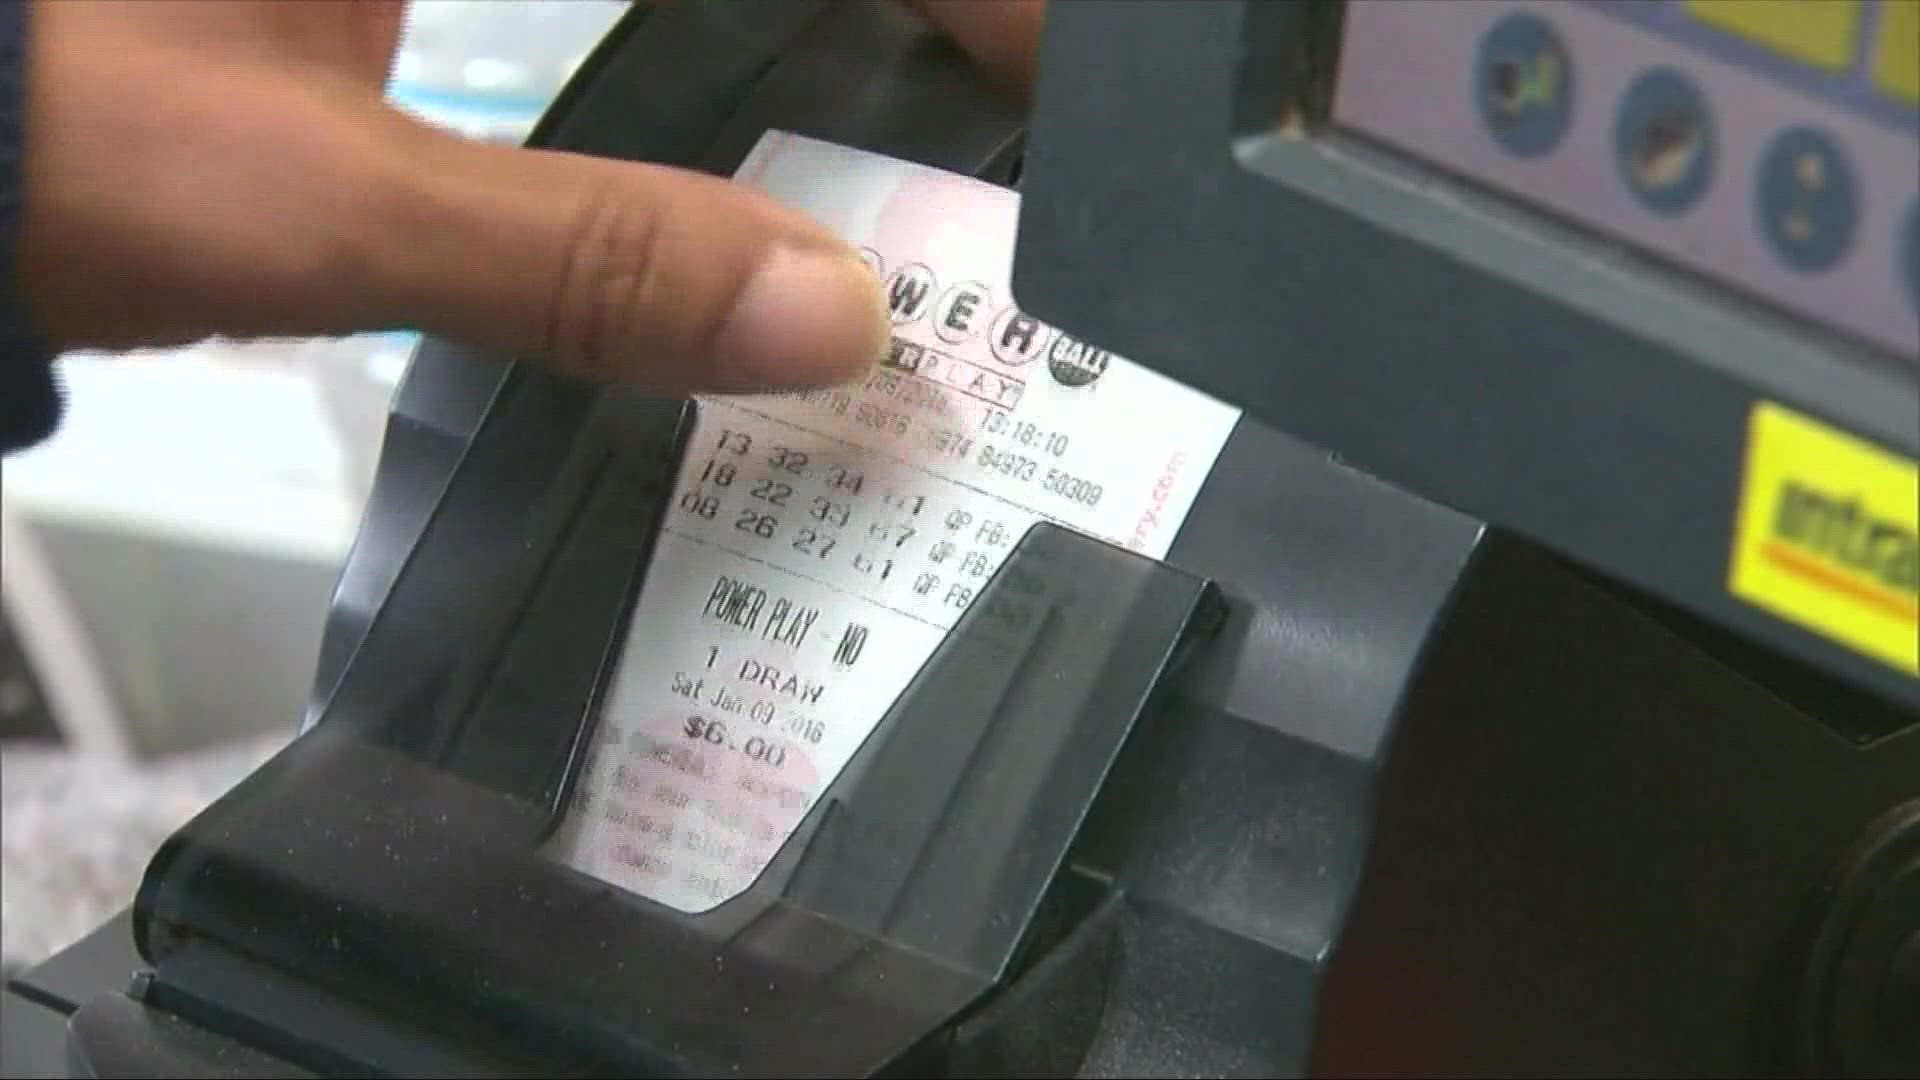 There was no winner in last night's Powerball lottery jackpot. Monday's drawing now soars to $1.9 billion, the largest lottery jackpot ever.